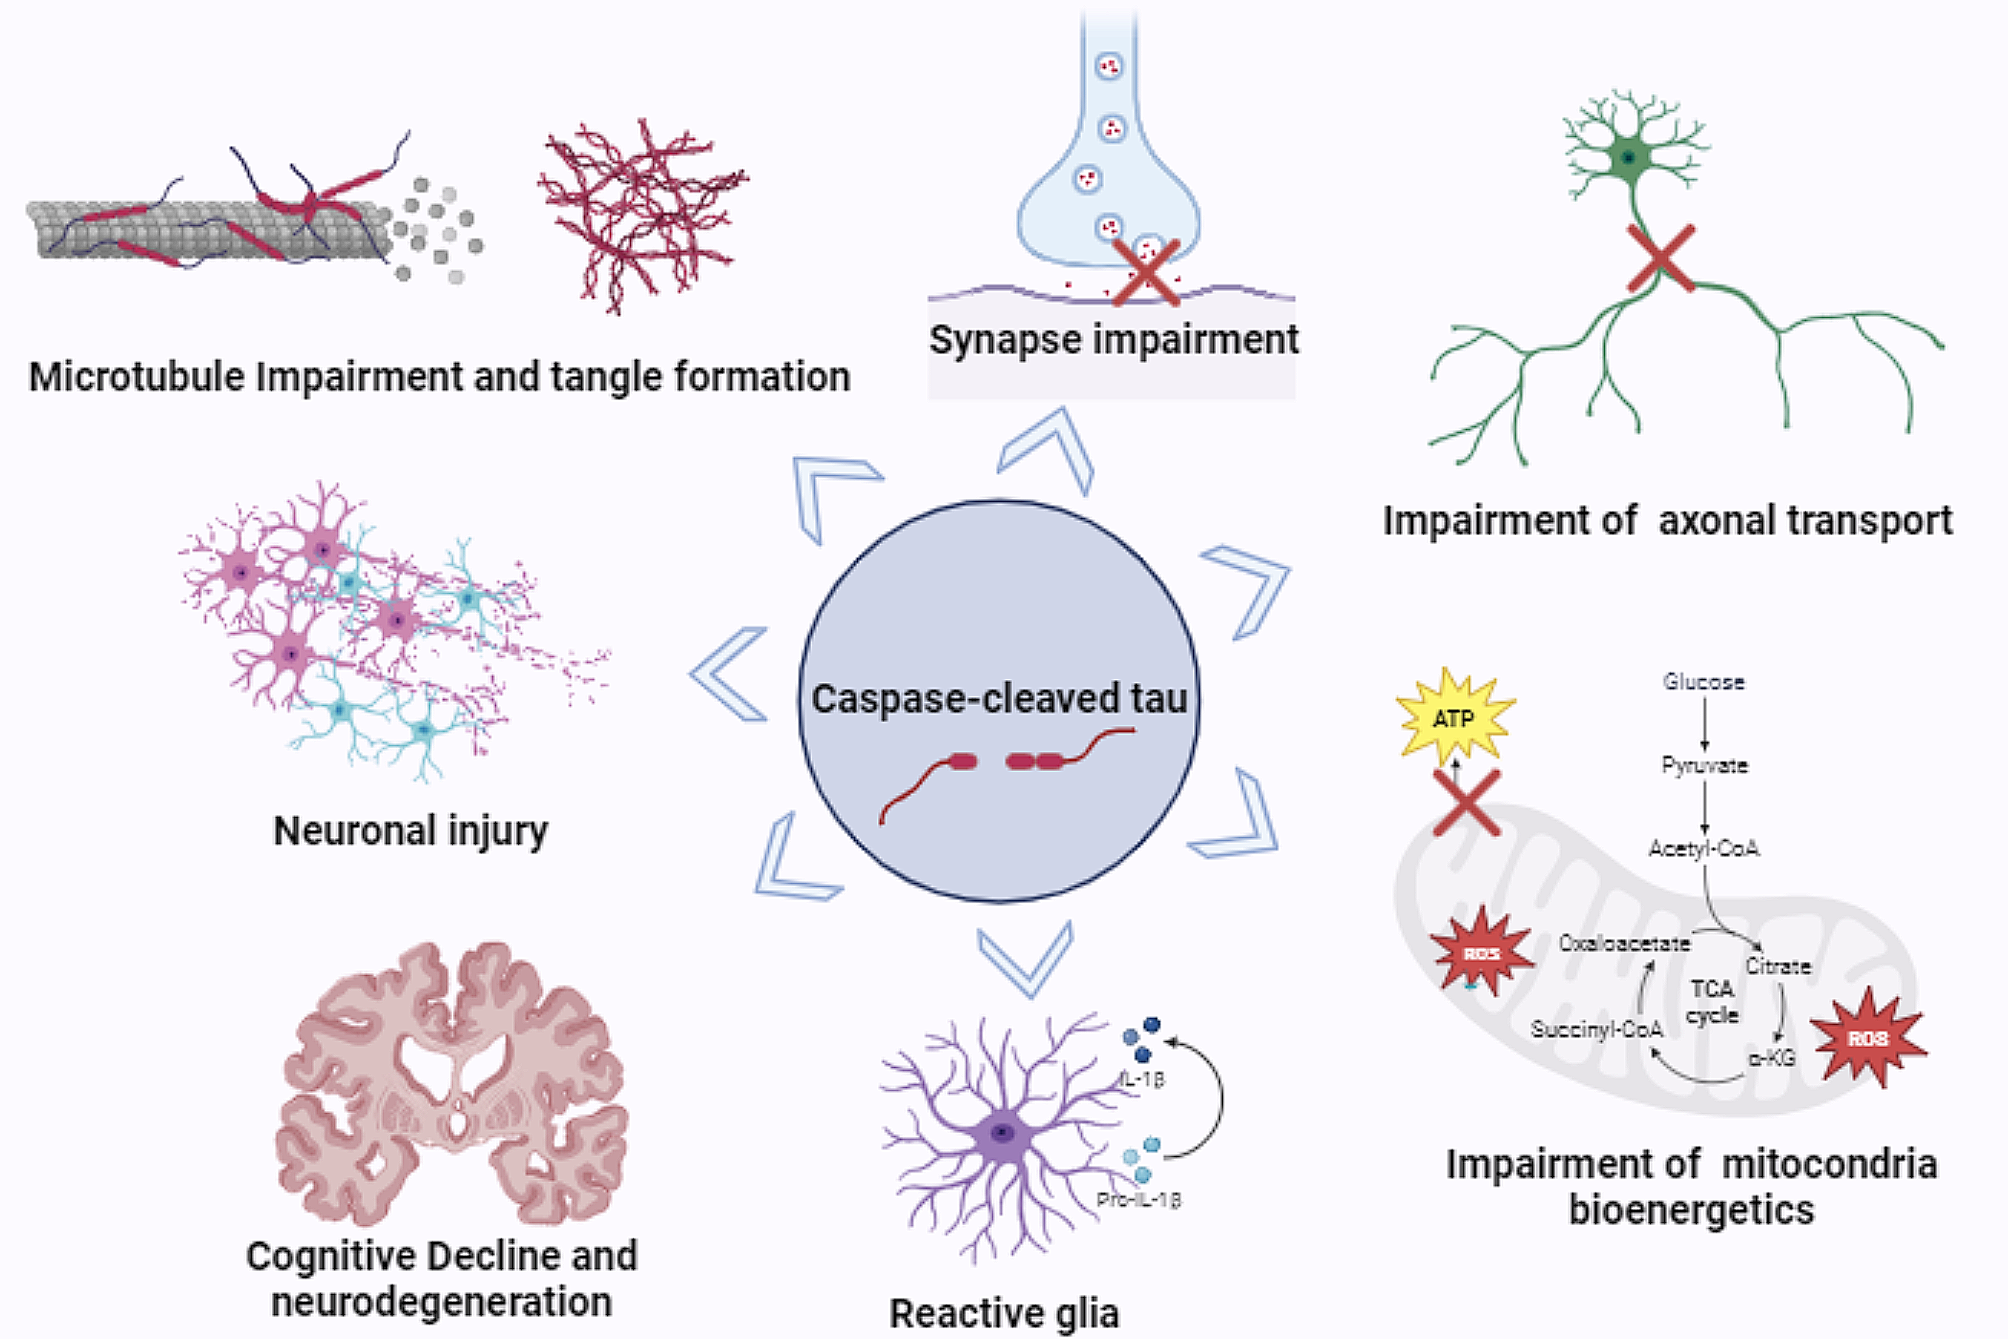 Exploring the significance of caspase-cleaved tau in tauopathies and as a complementary pathology to phospho-tau in Alzheimer’s disease: implications for biomarker development and therapeutic targeting